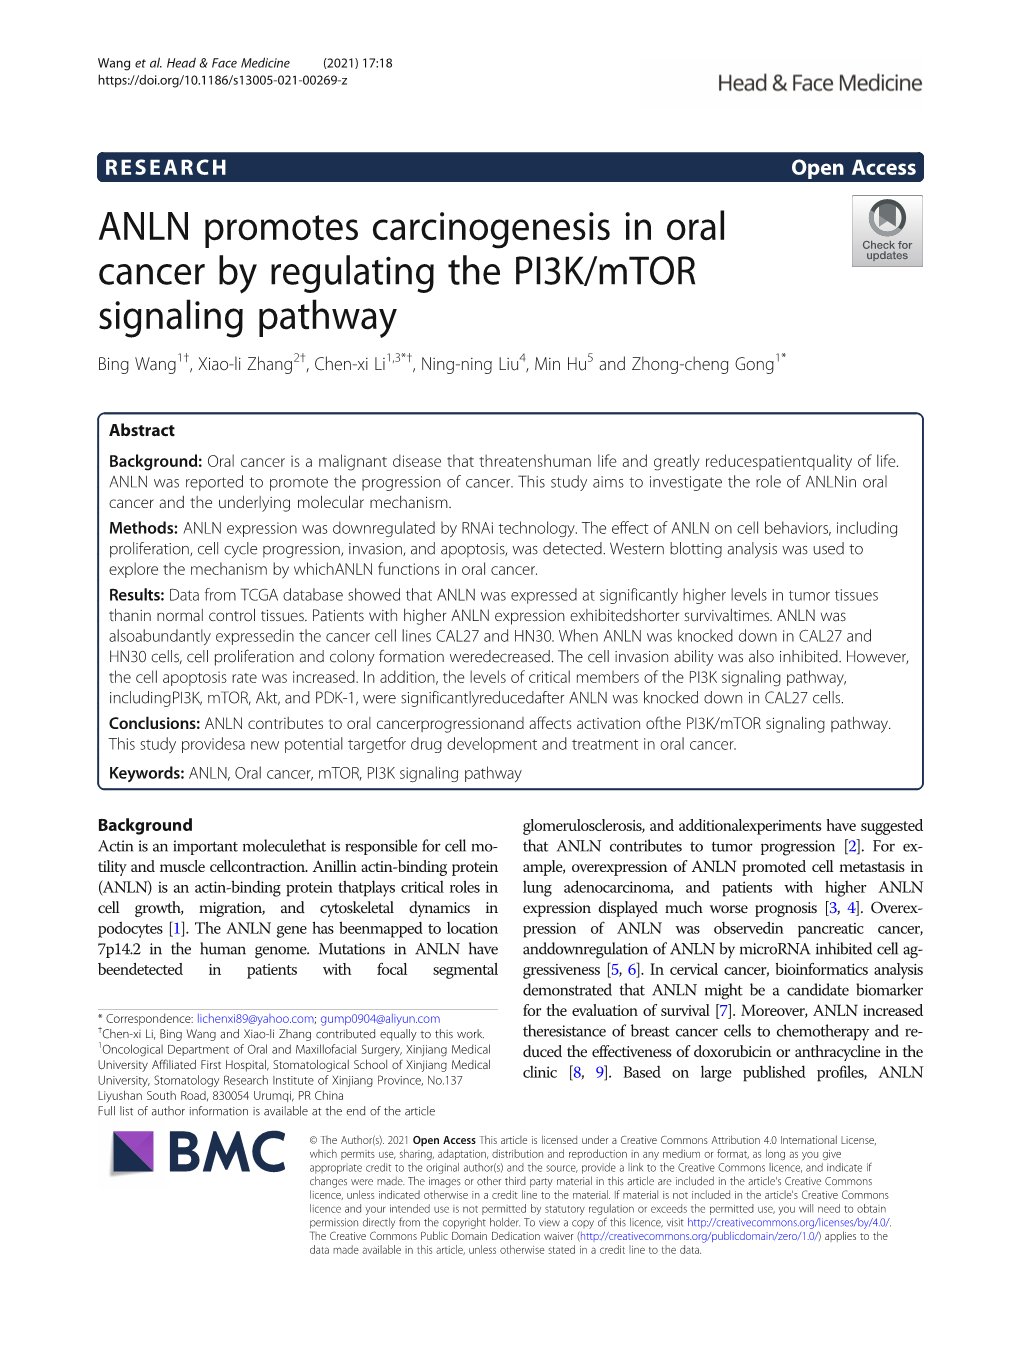 ANLN Promotes Carcinogenesis in Oral Cancer by Regulating the PI3K